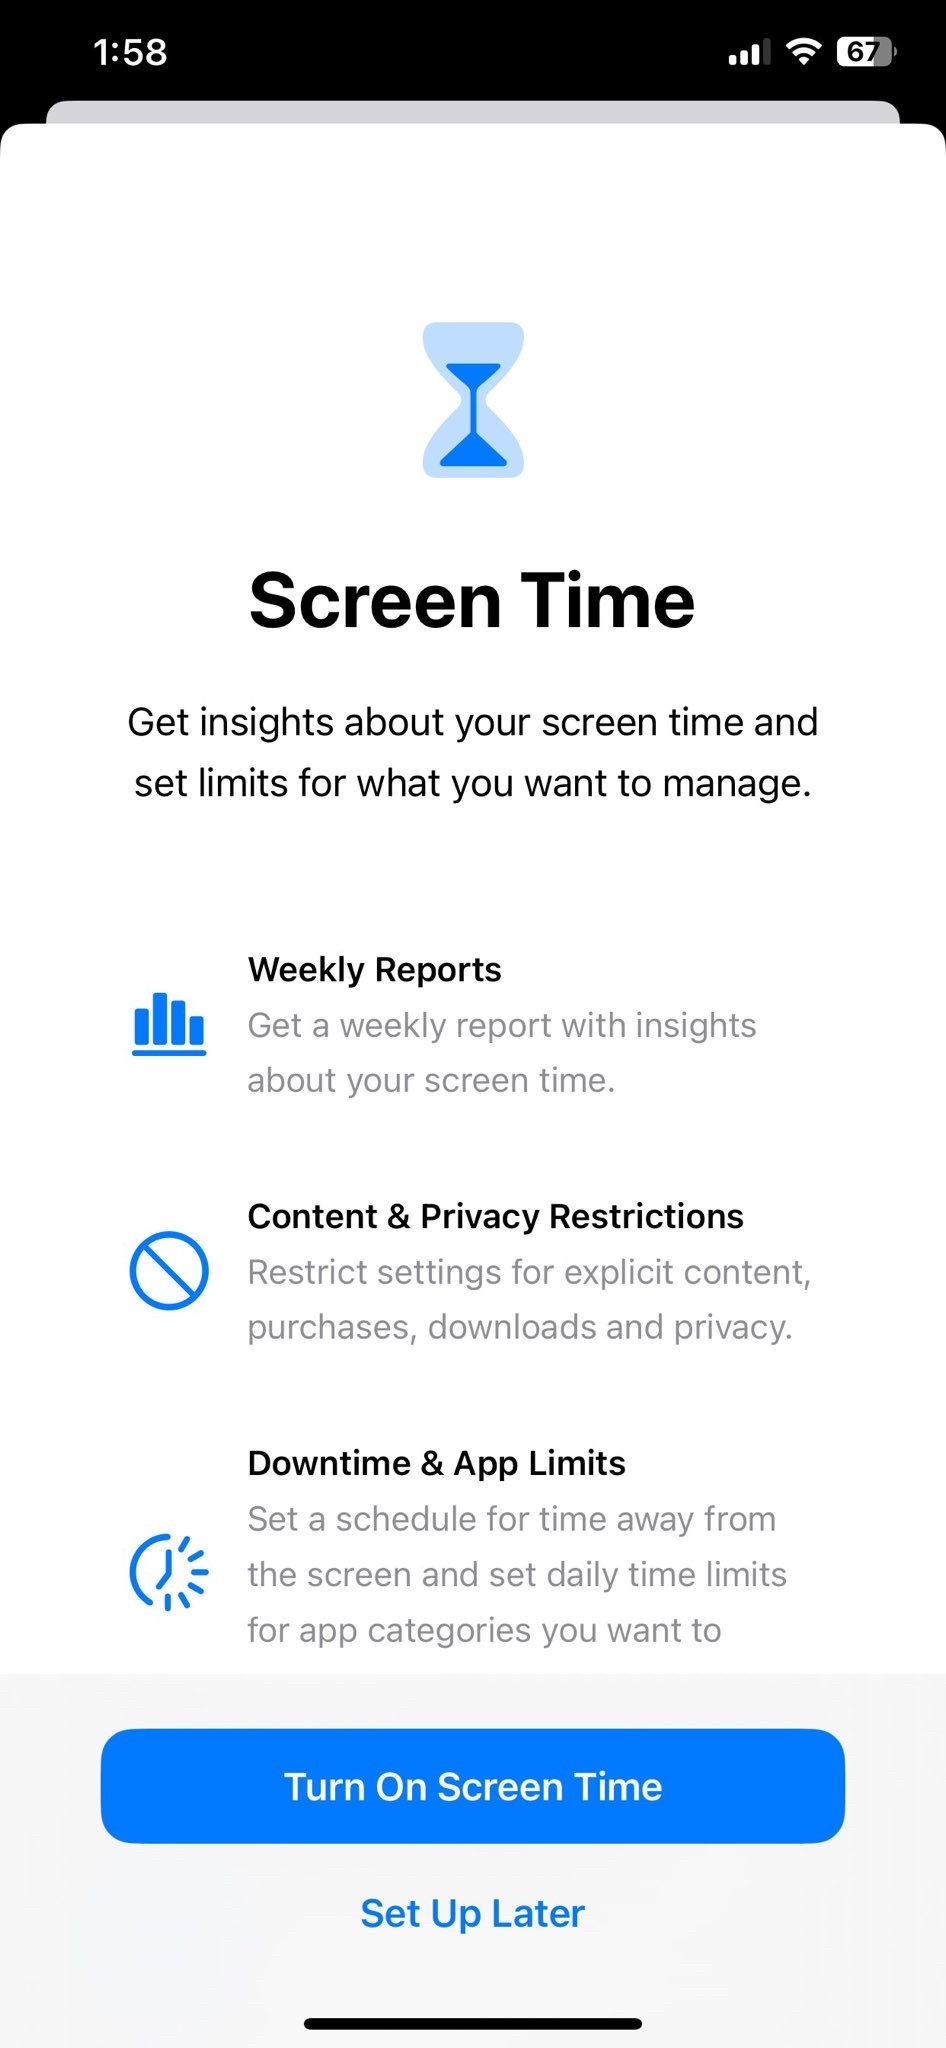 Tap 'Screen Time' and then tap 'Turn On Screen Time